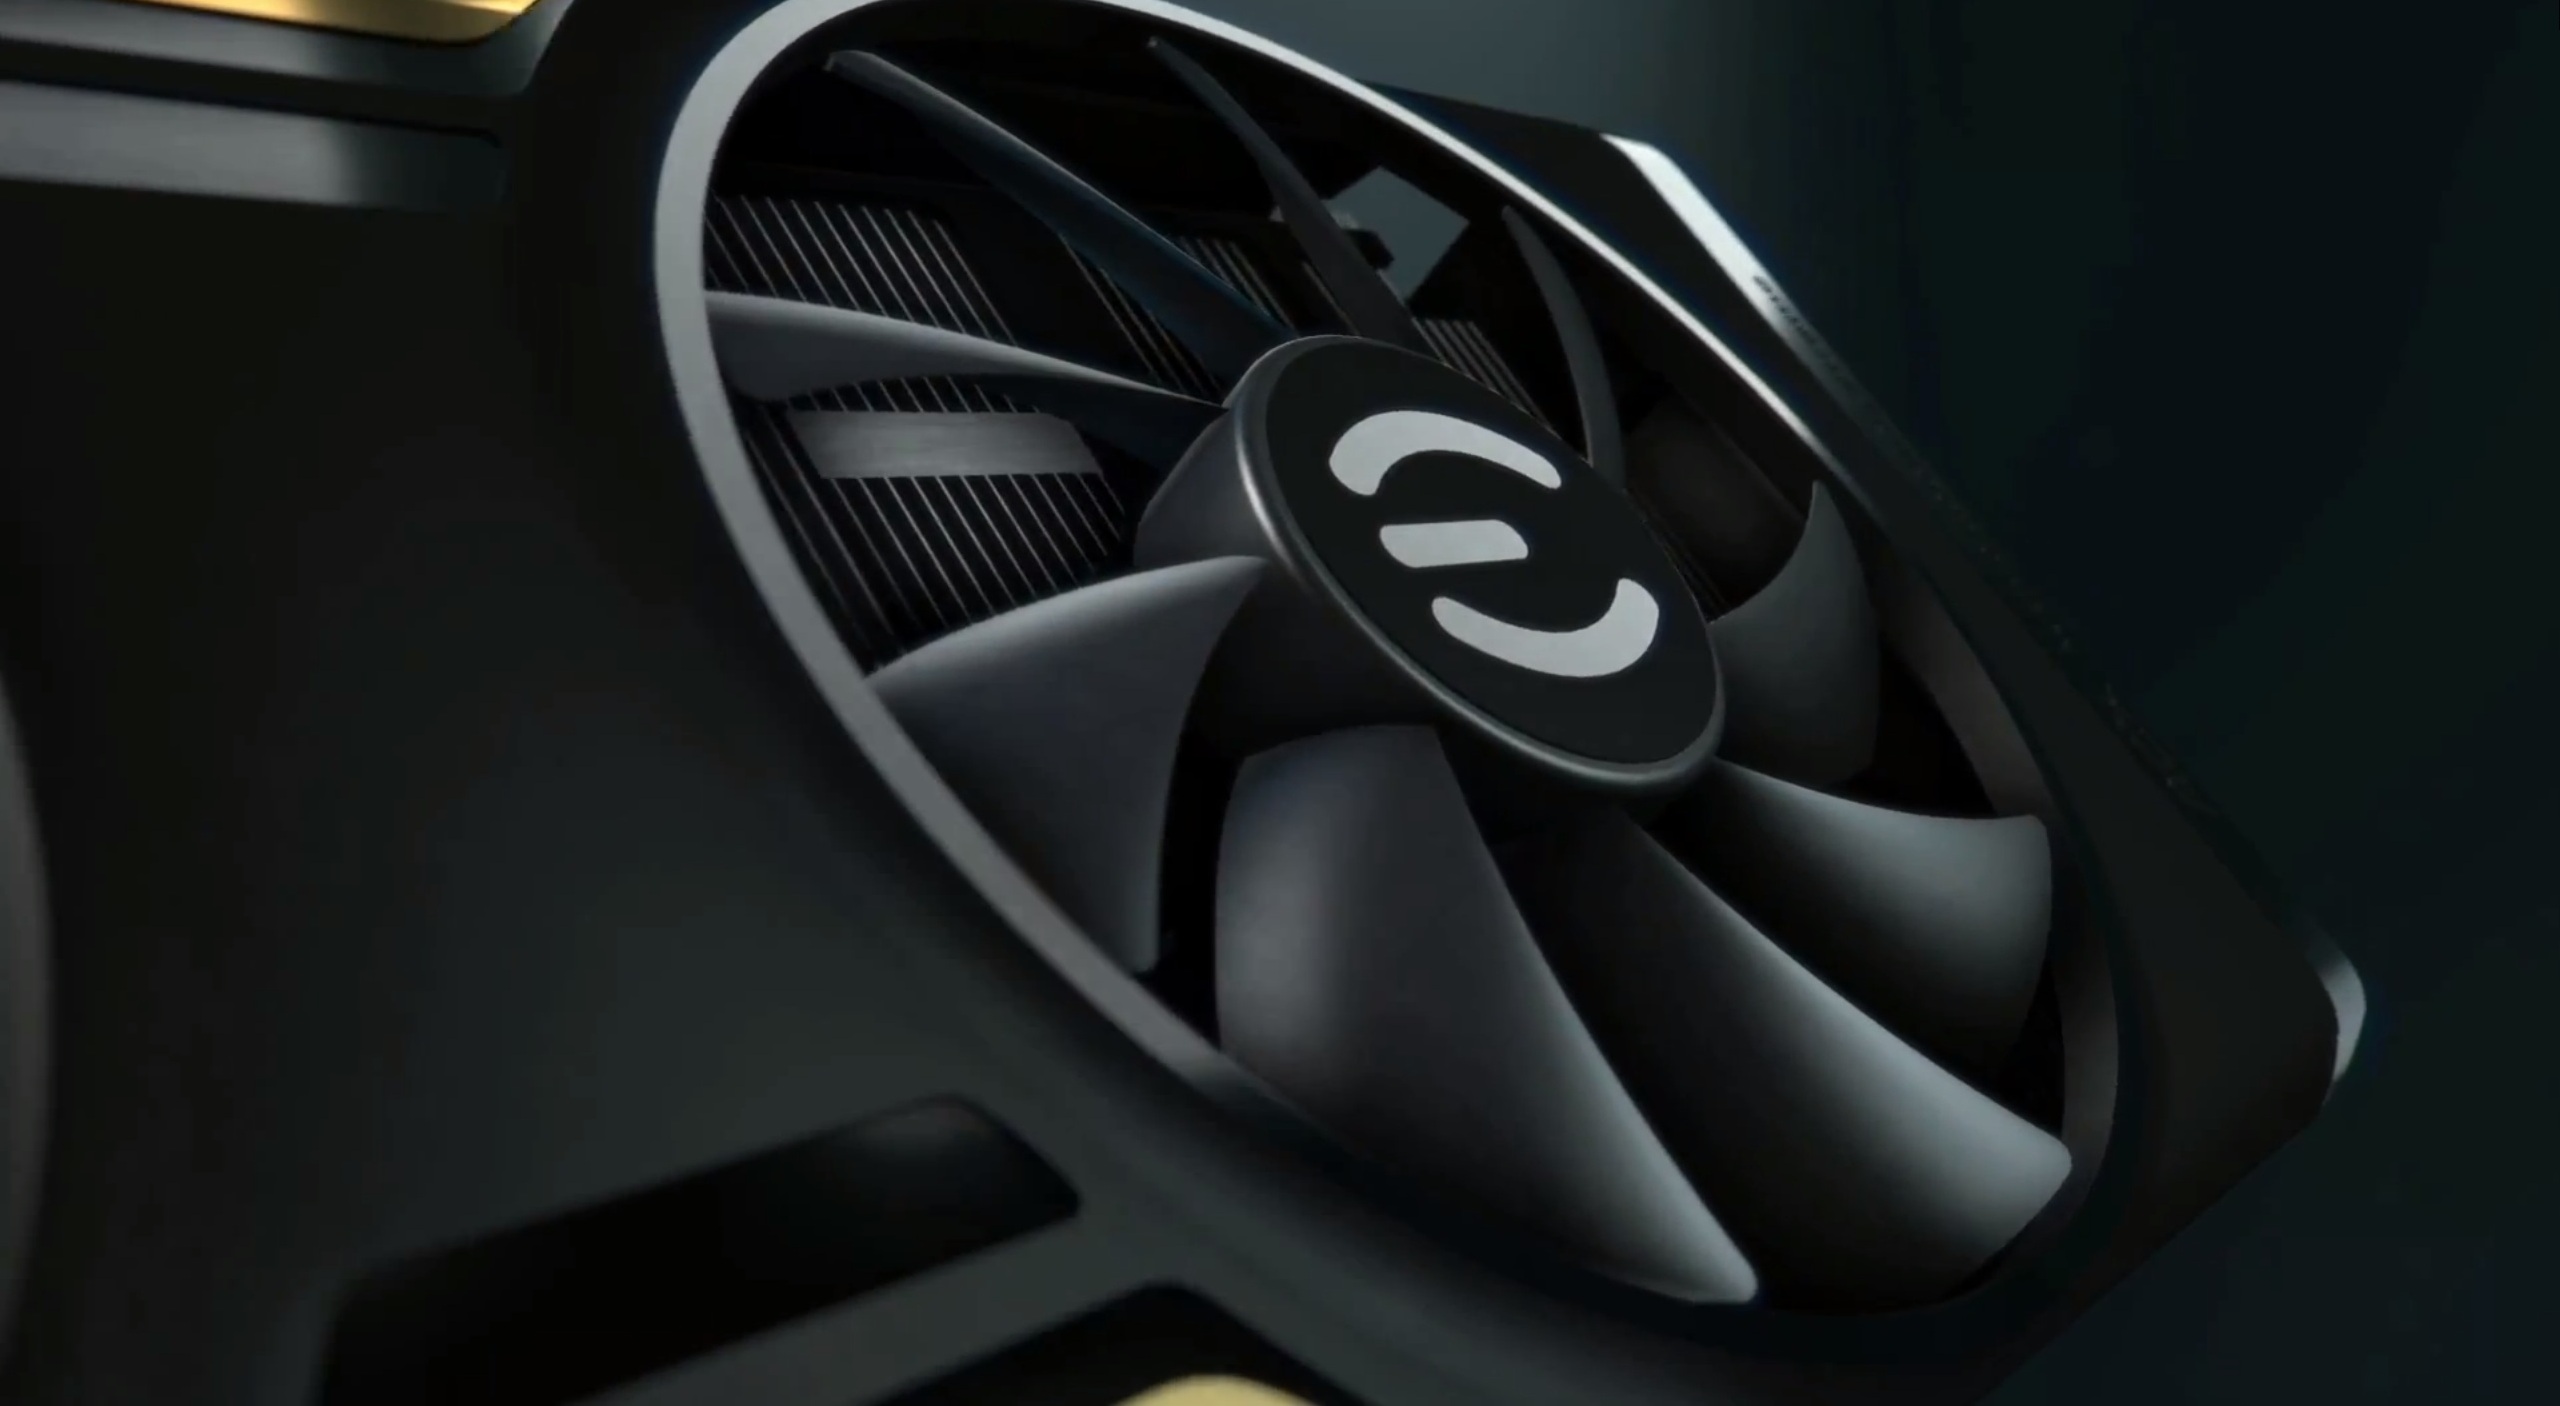 Evga Teases Acx Cooler For Geforce Gtx And